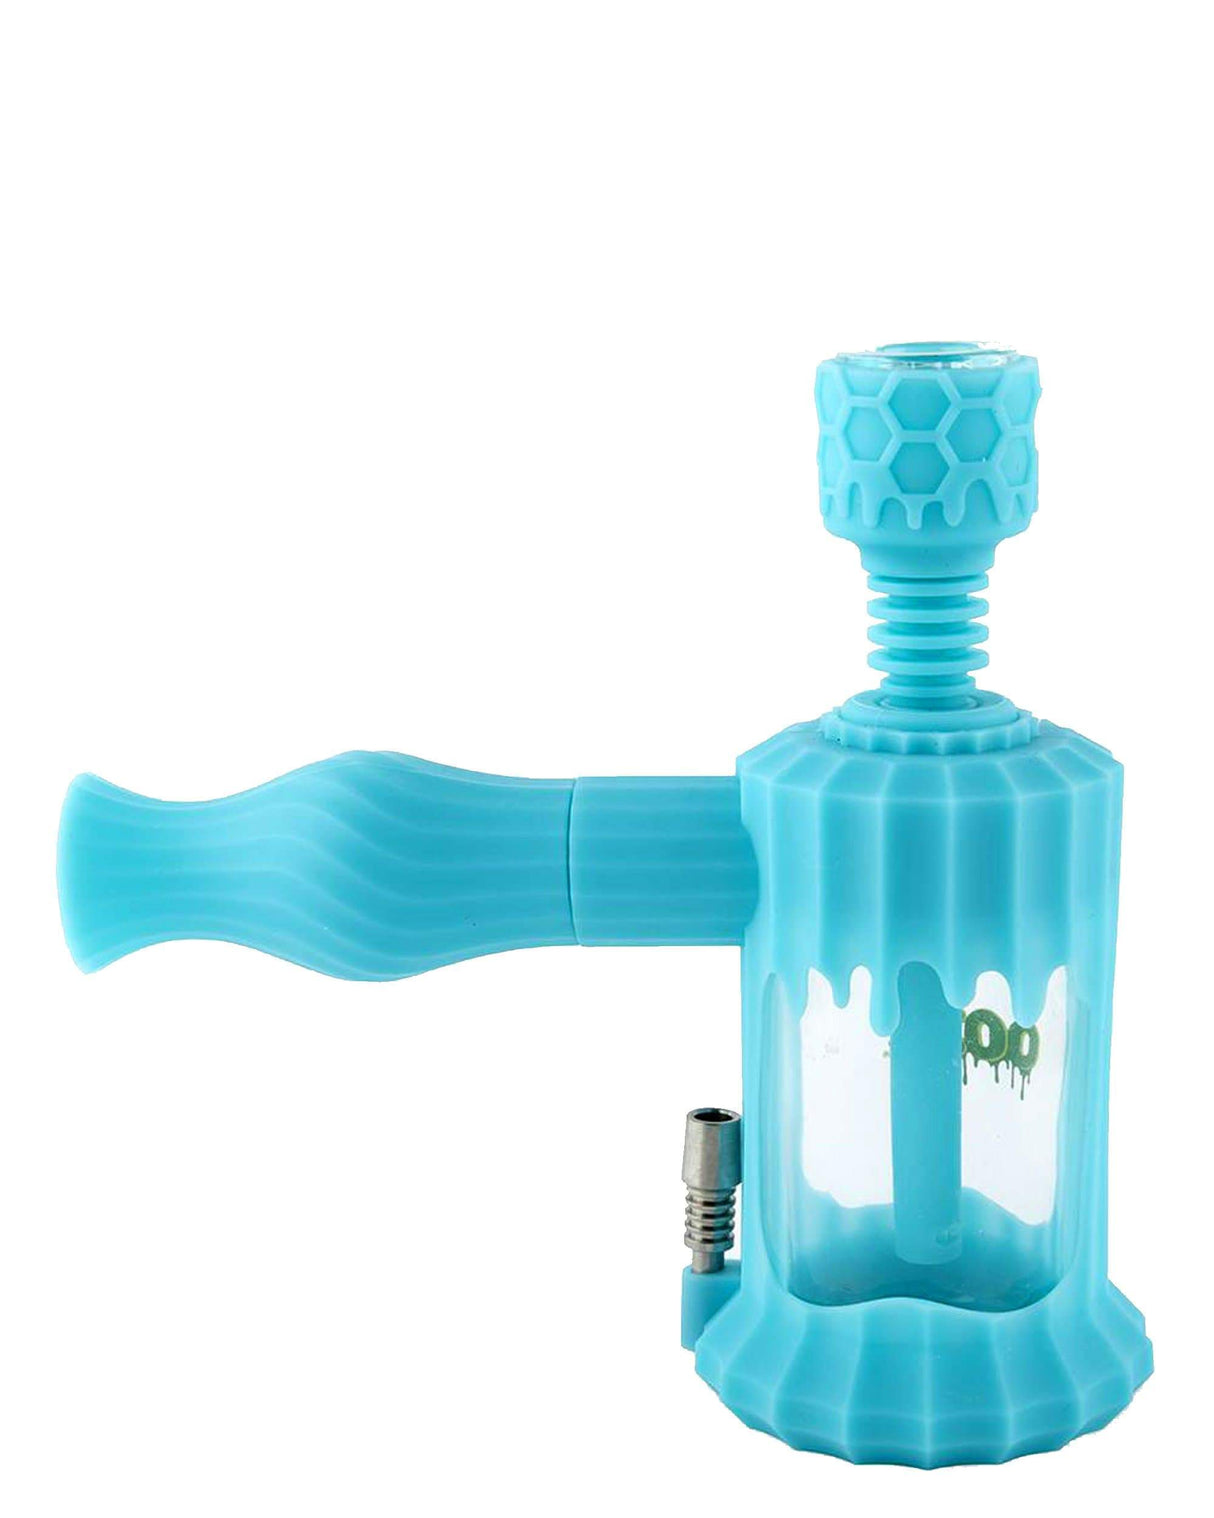 Ooze Clobb 4 in 1 Silicone Pipe in Teal, Hammer Design, Side View with Quartz Bowl